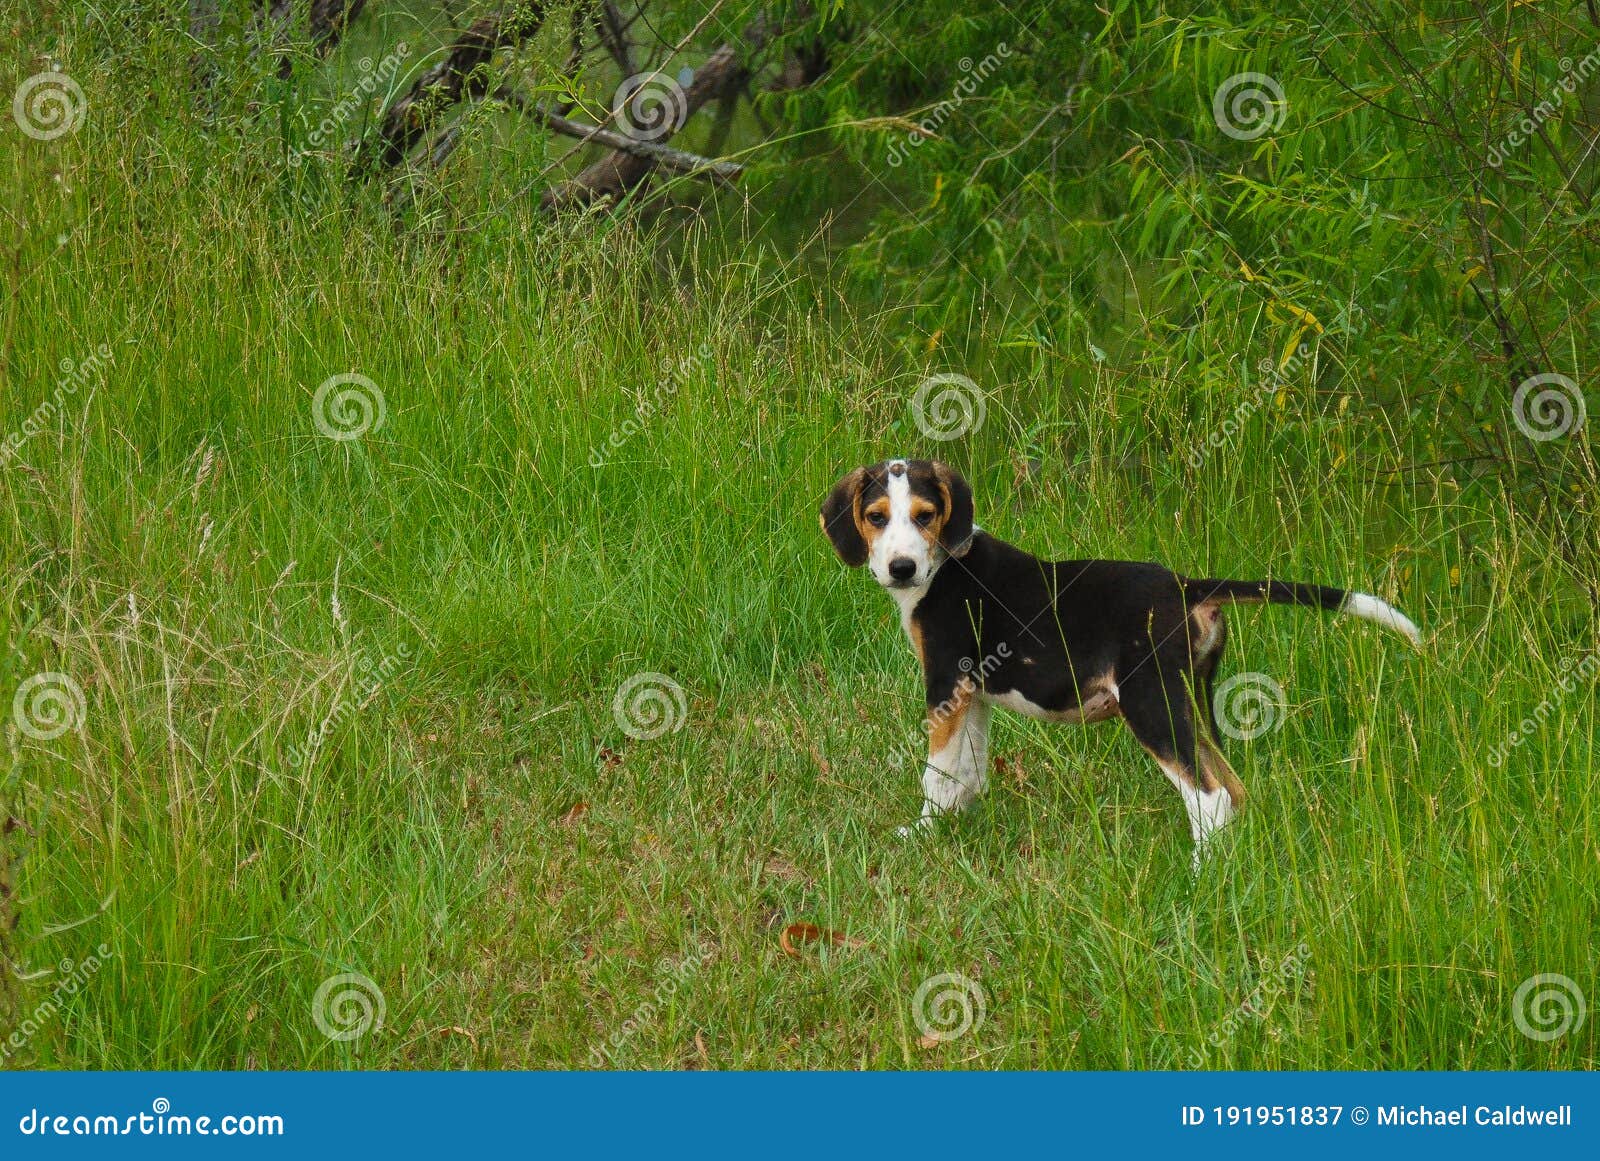 a coonhound looks for master before proceeding